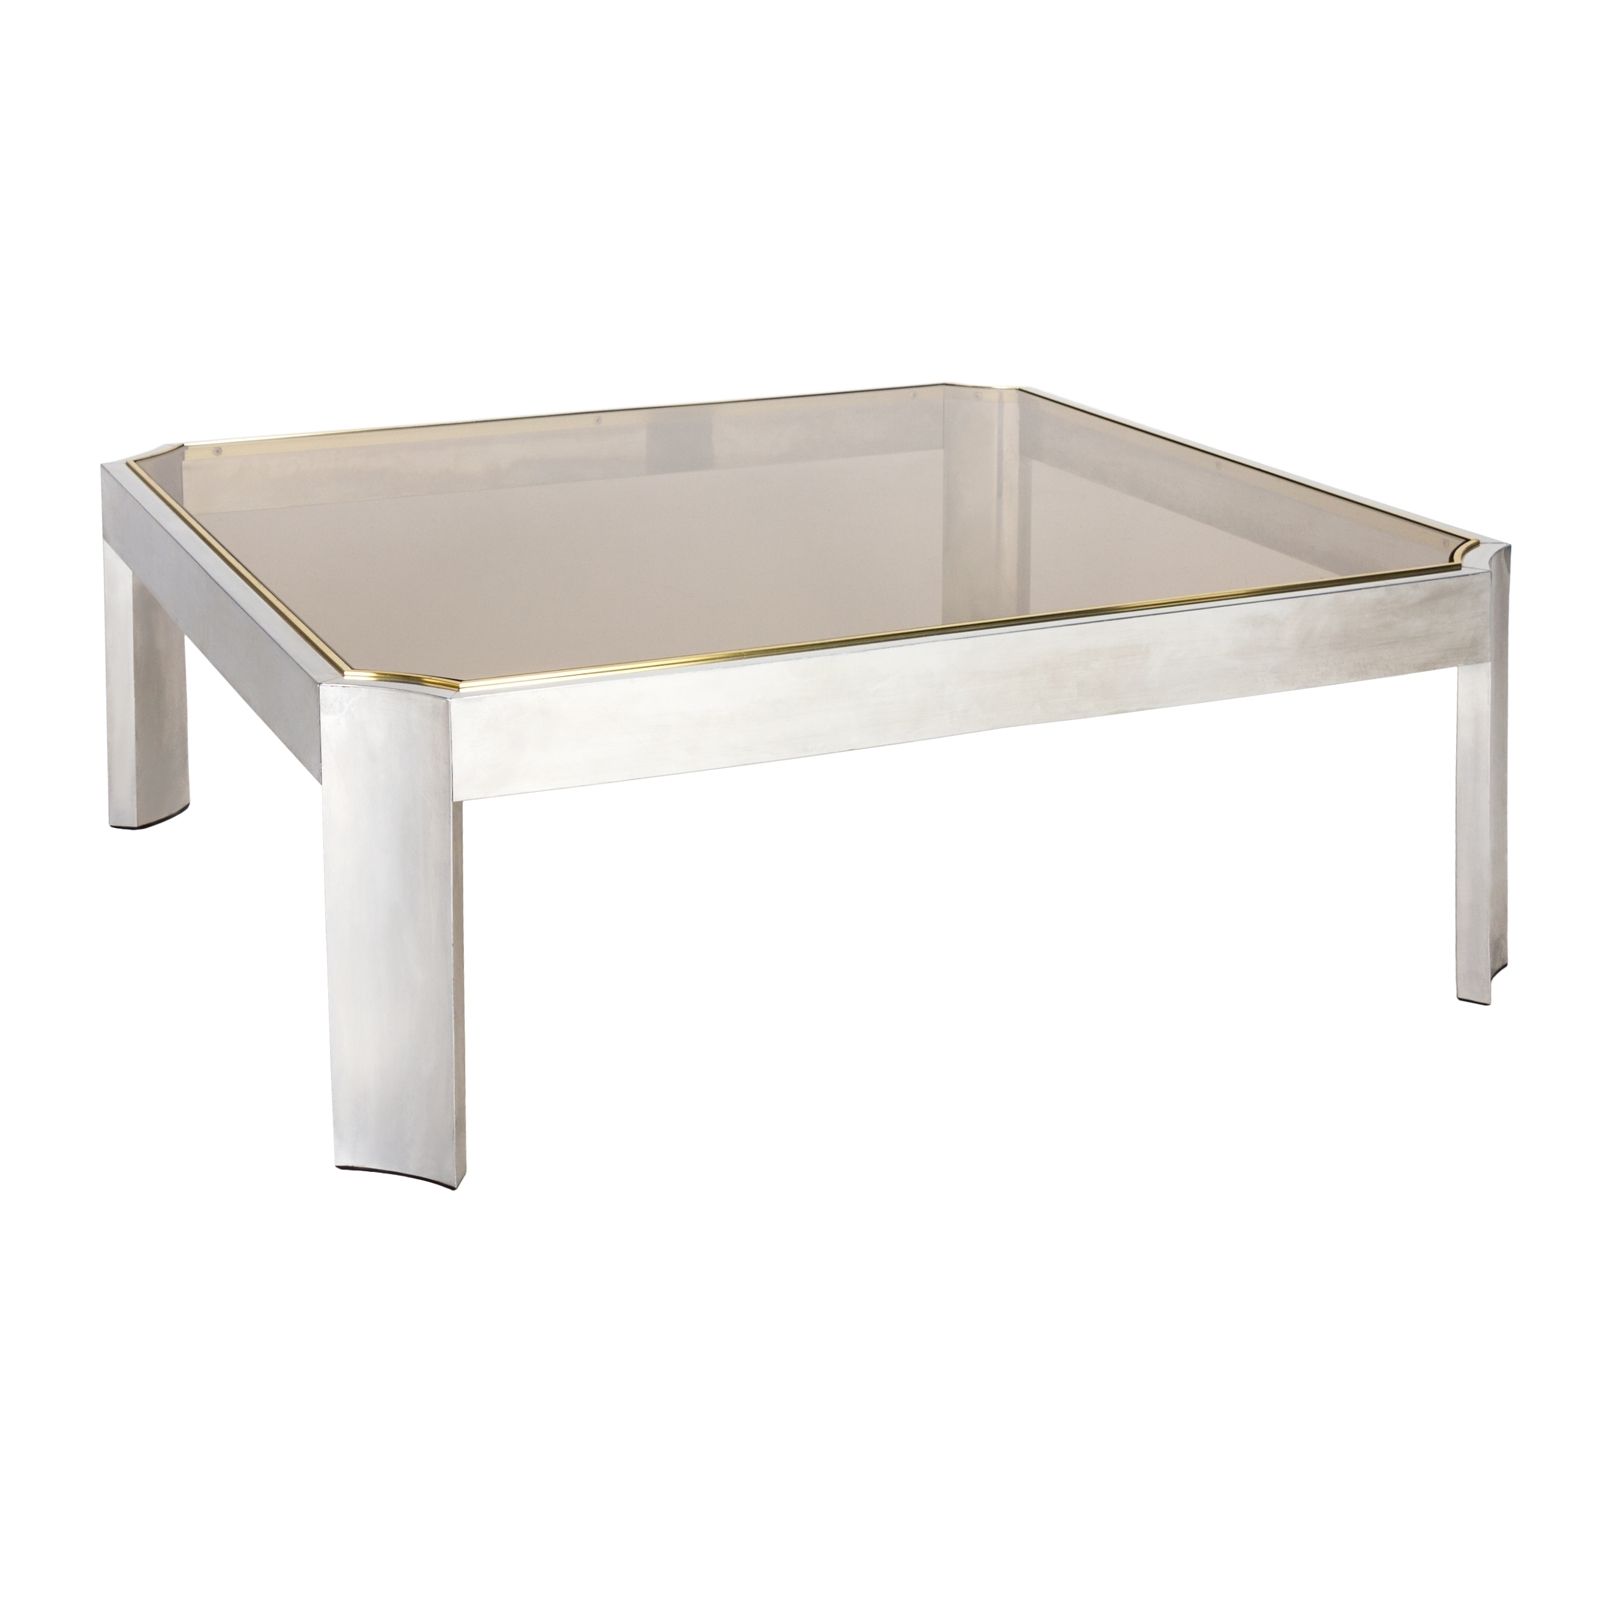 Vintage Brass Waterfall Coffee Table Acrylic Rotating Glass Pertaining To Square Waterfall Coffee Tables (View 5 of 30)